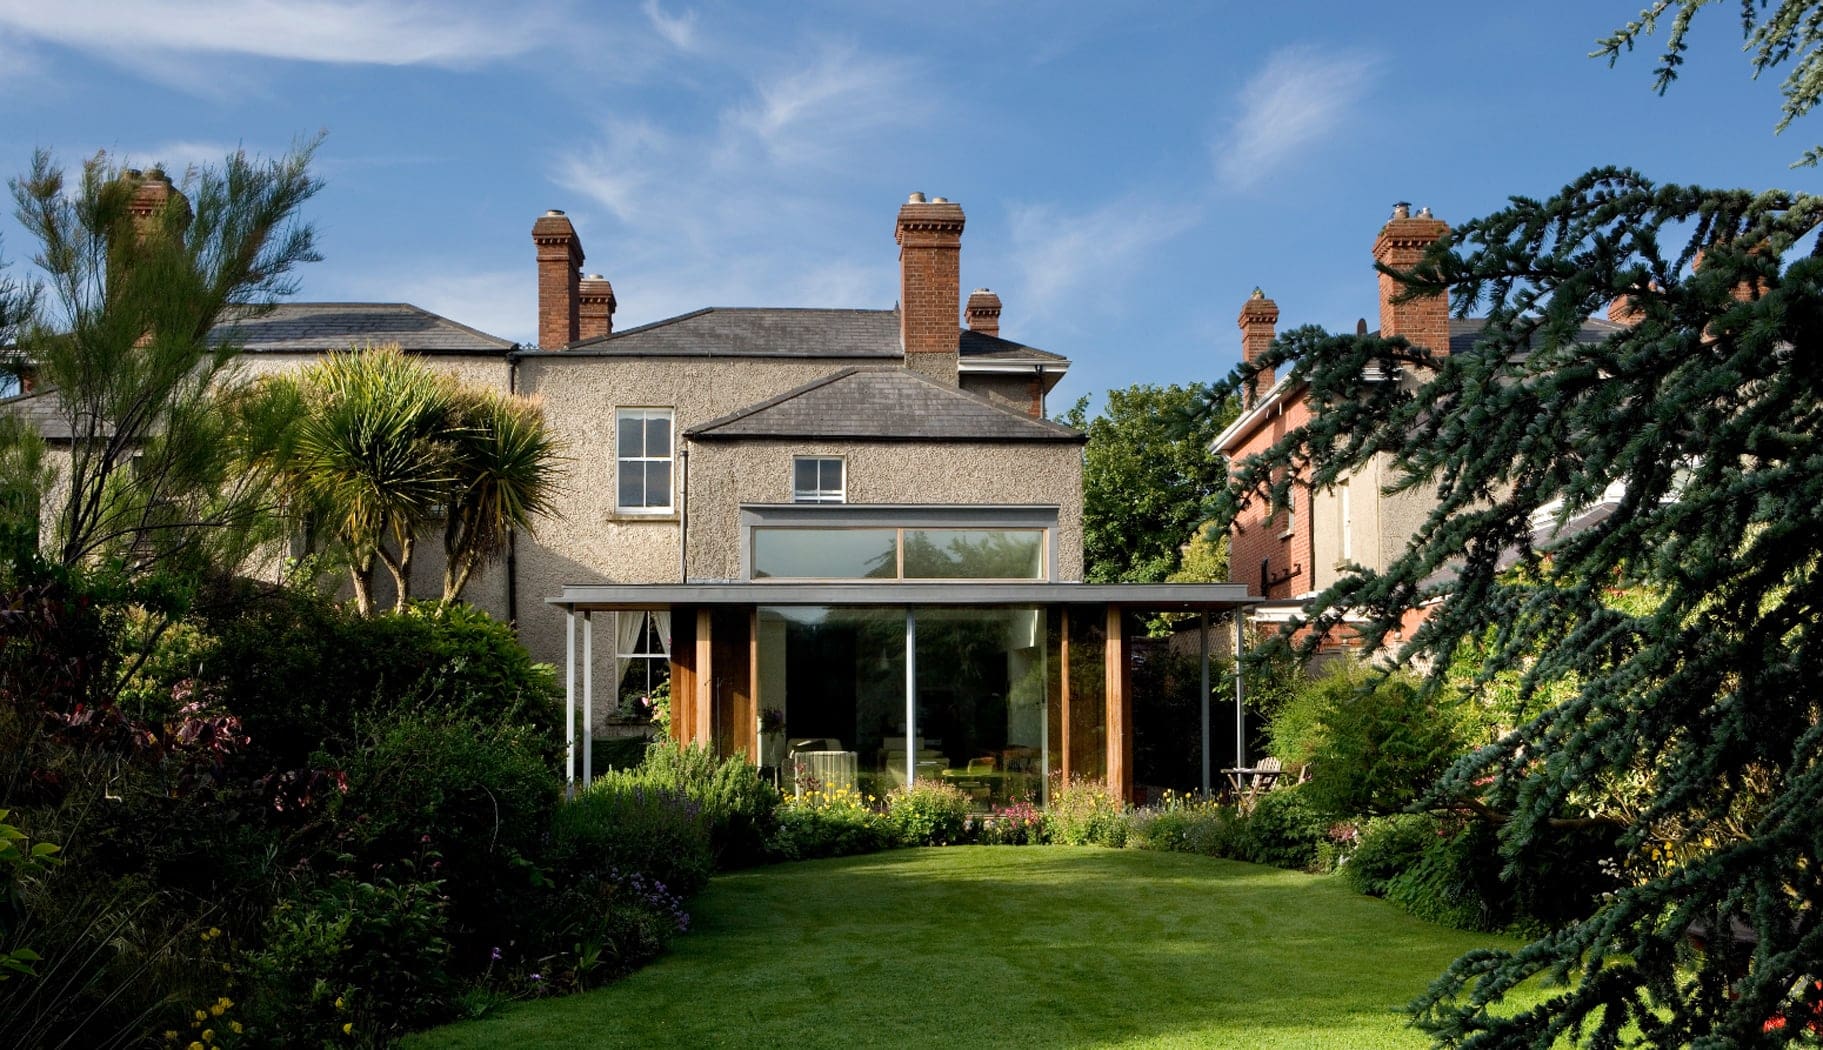 Architects in Dublin design a picturesque home surrounded by a beautiful garden and well-manicured lawn